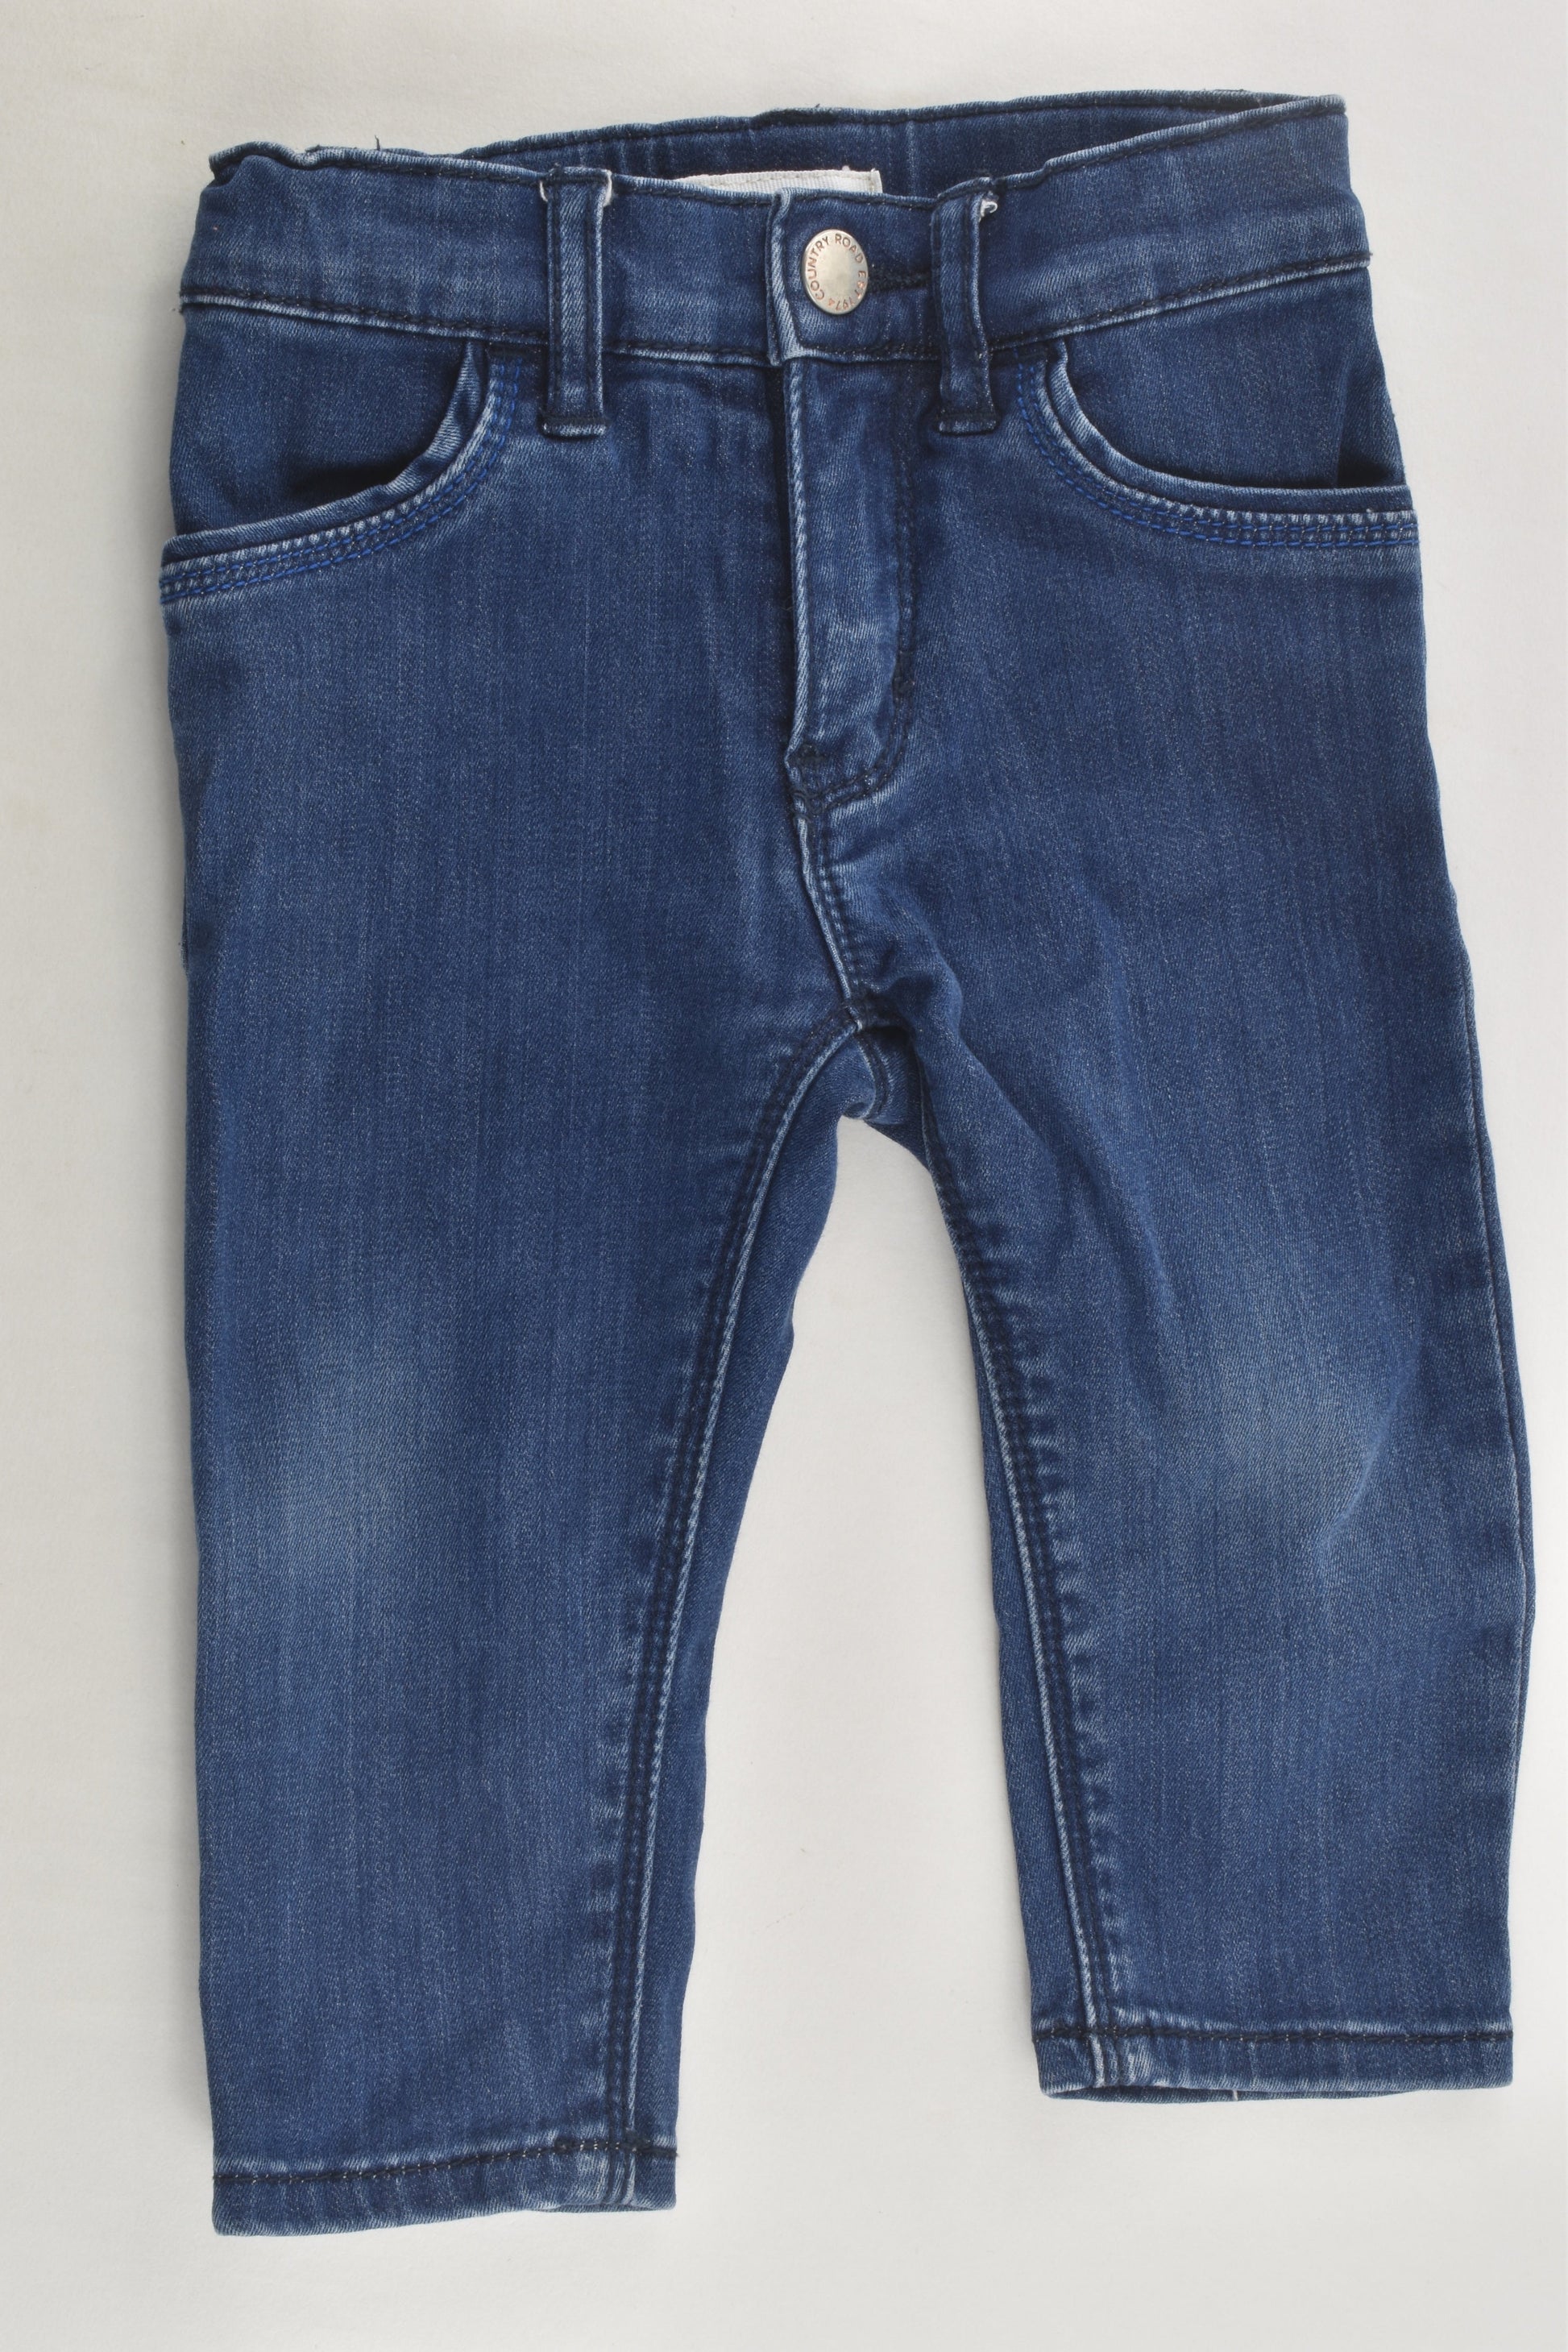 Country Road Size 0 Denim Pants